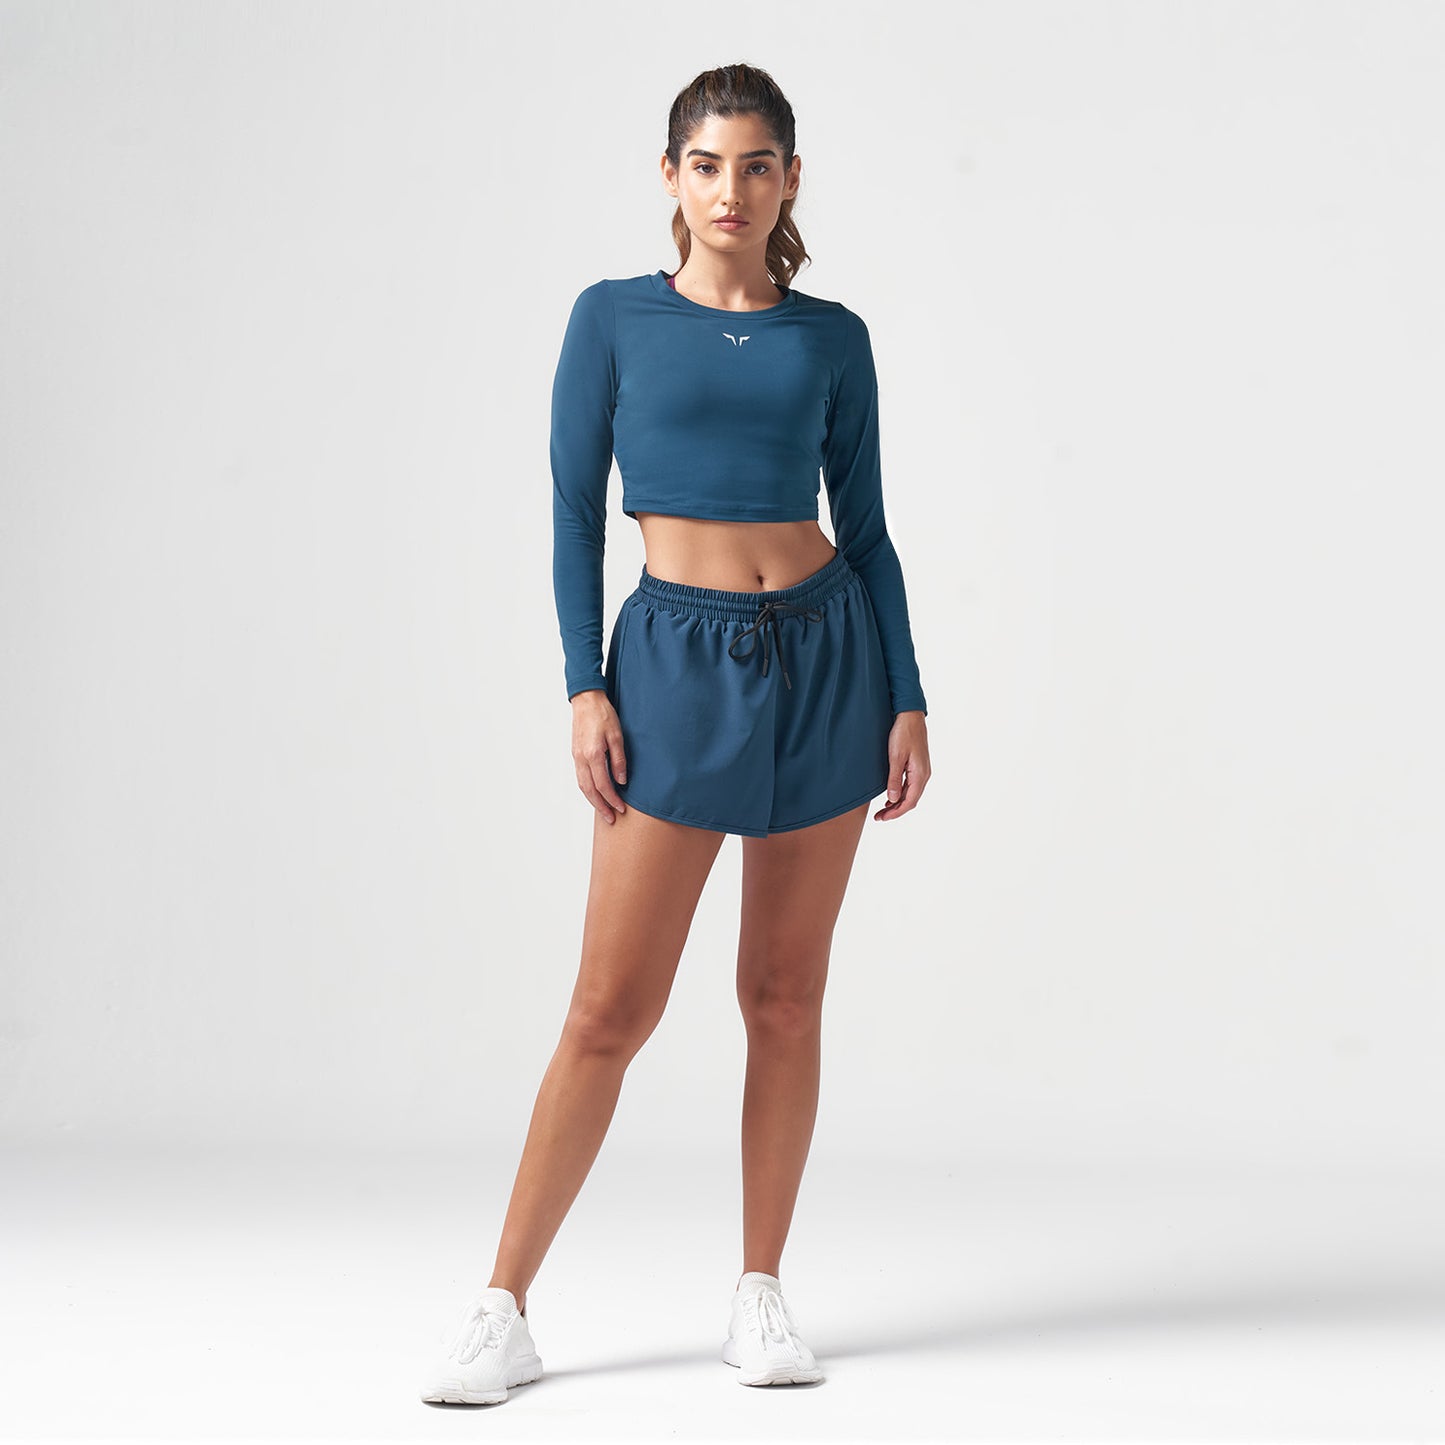 squatwolf-gym-wear-essential-full-sleeves-crop-top-teal-workout-top-for-women